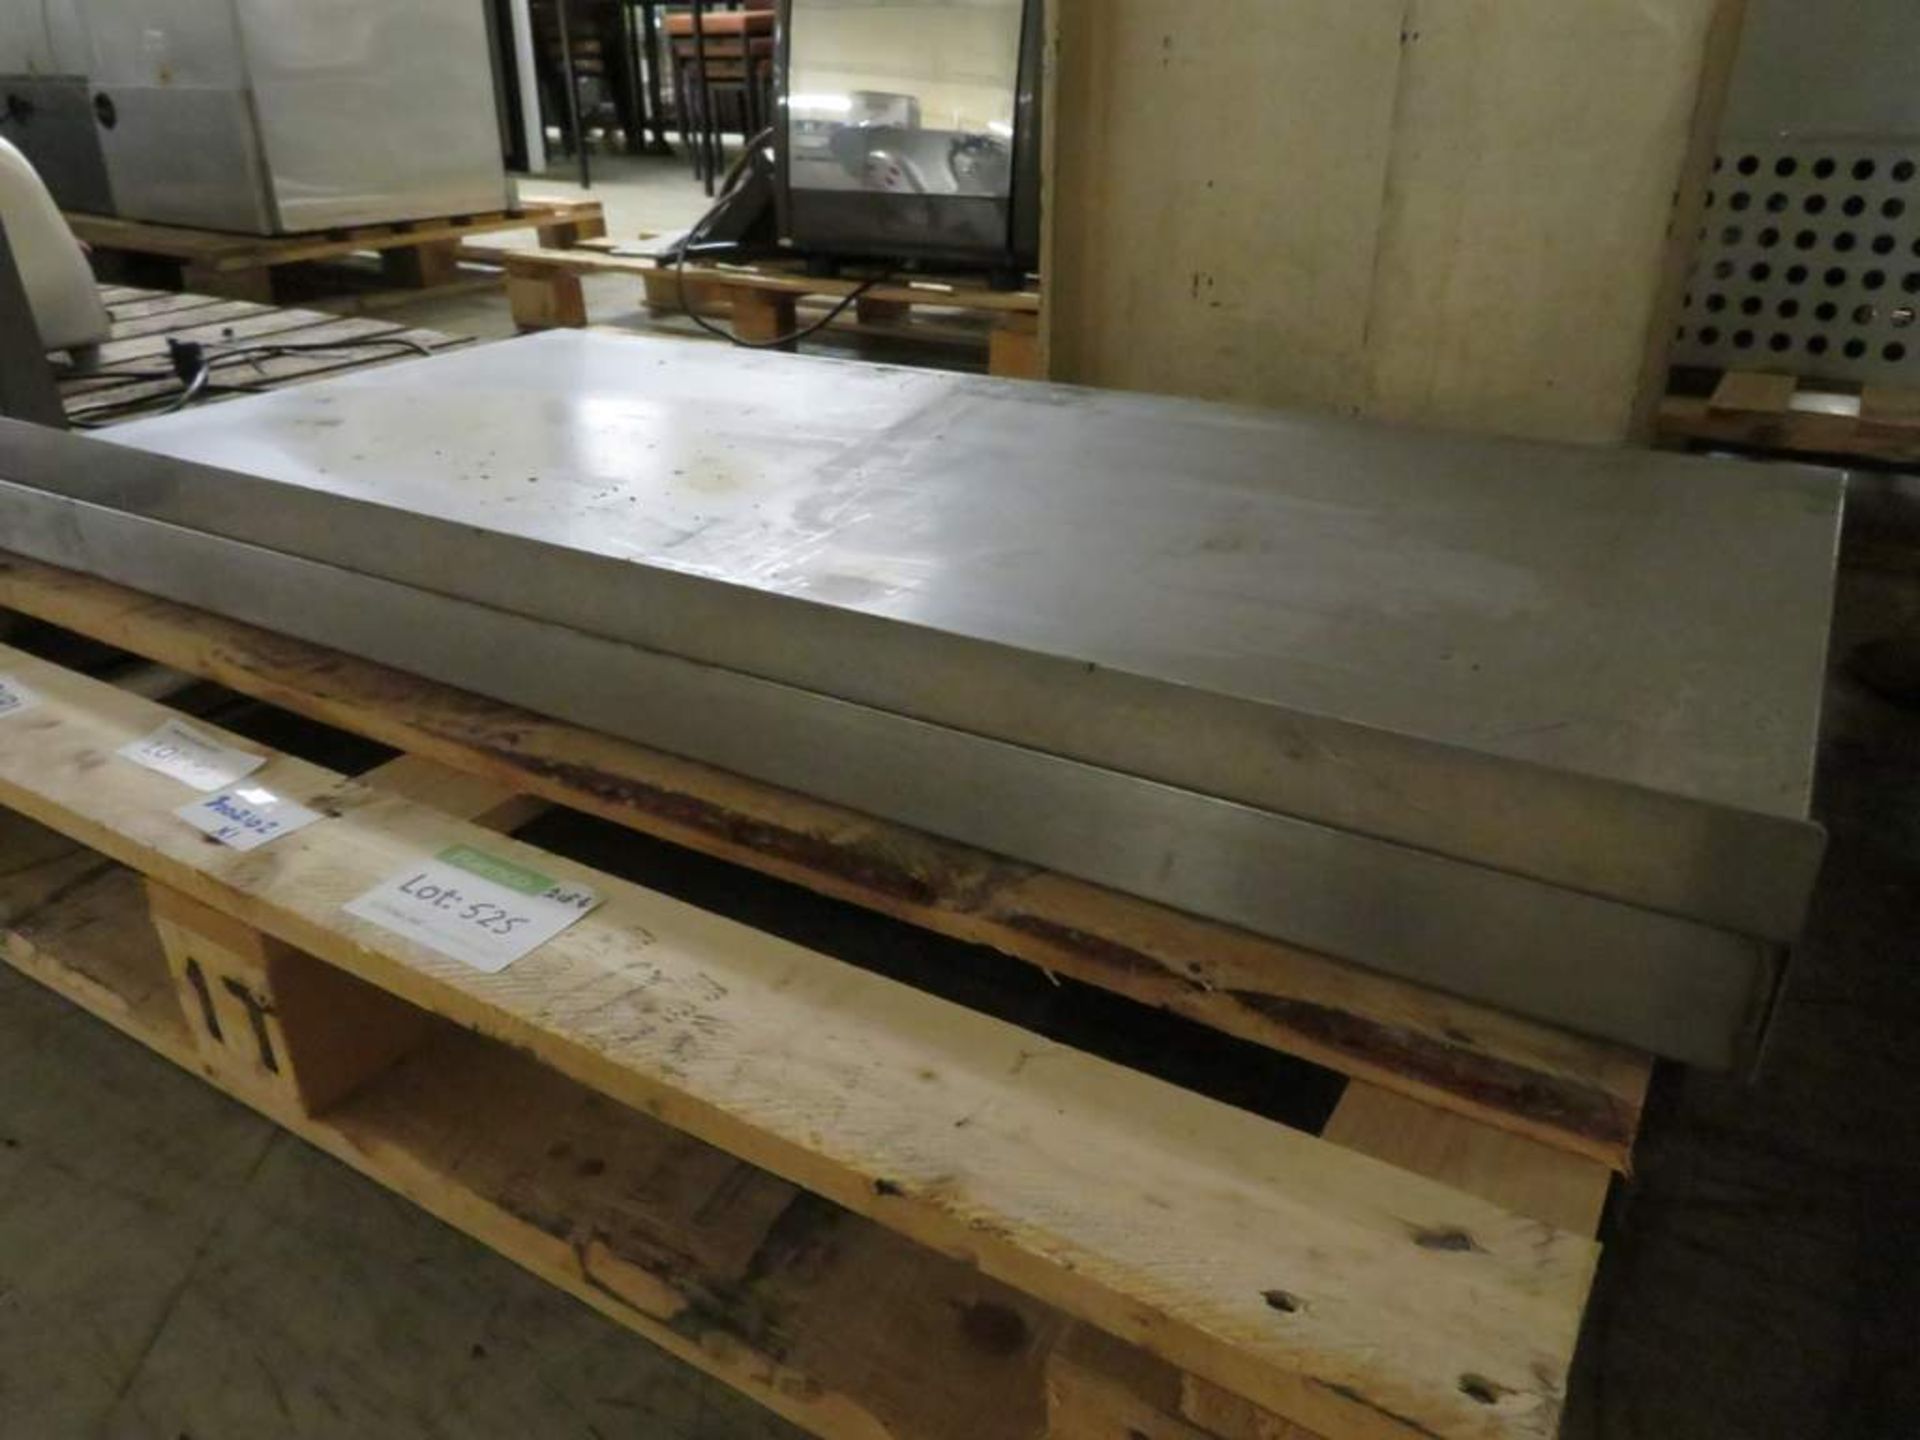 Stainless Steel Worktop on Rollers 124 x 65 x 12cm - Image 2 of 3